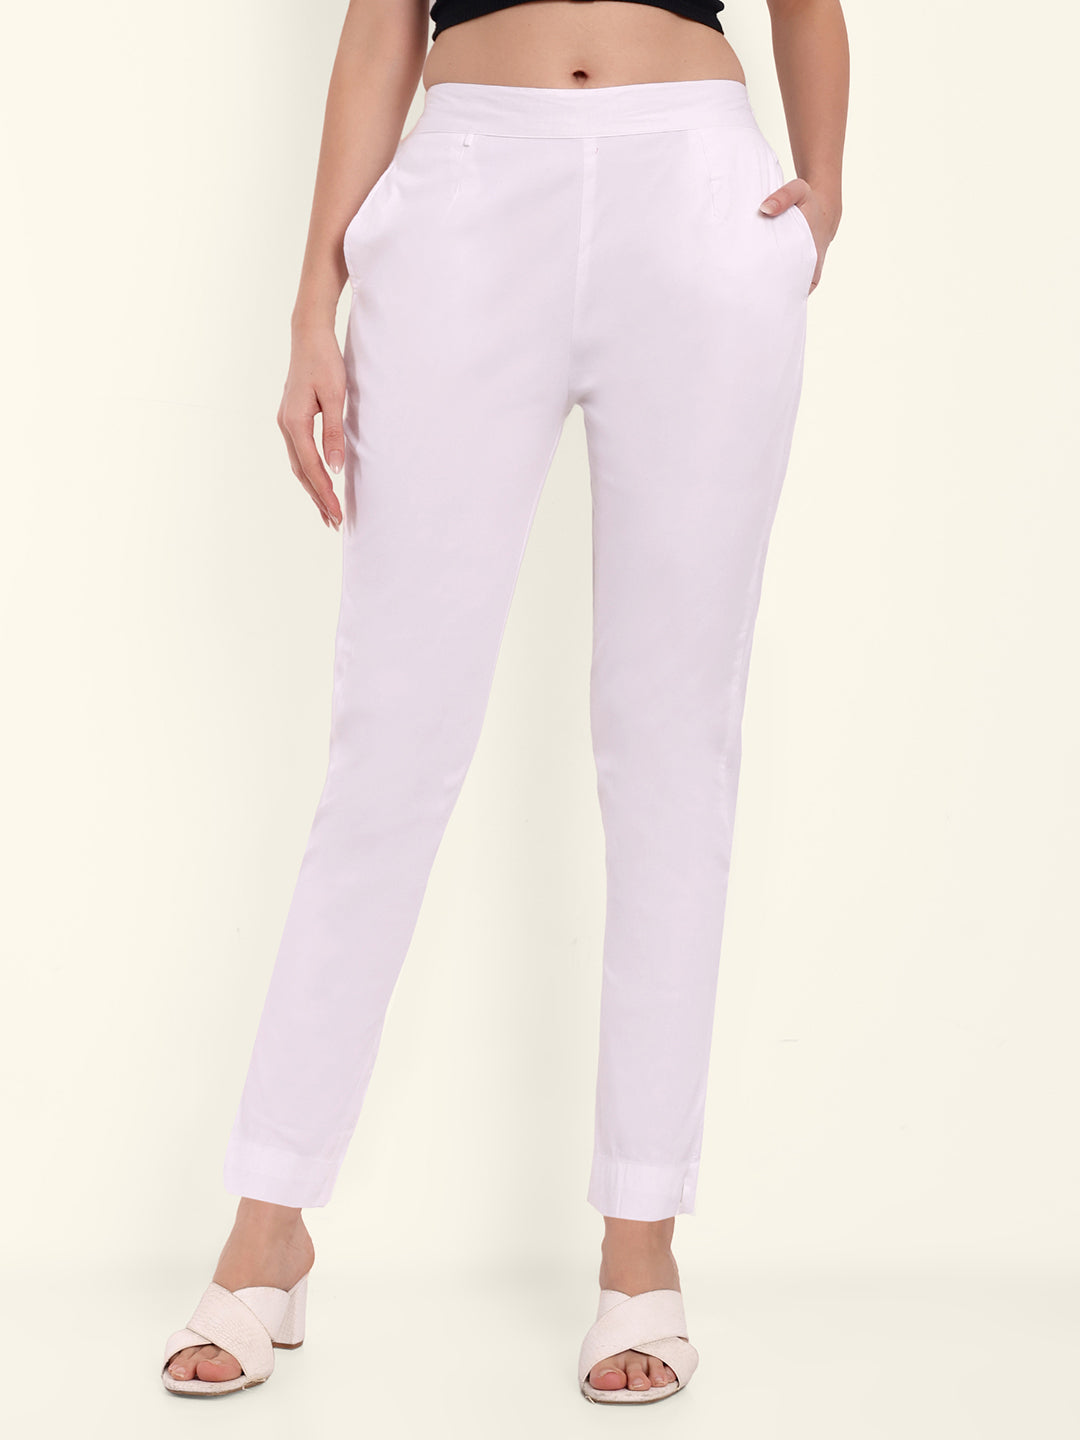 Naariy Stretchable Cotton Pants for Women